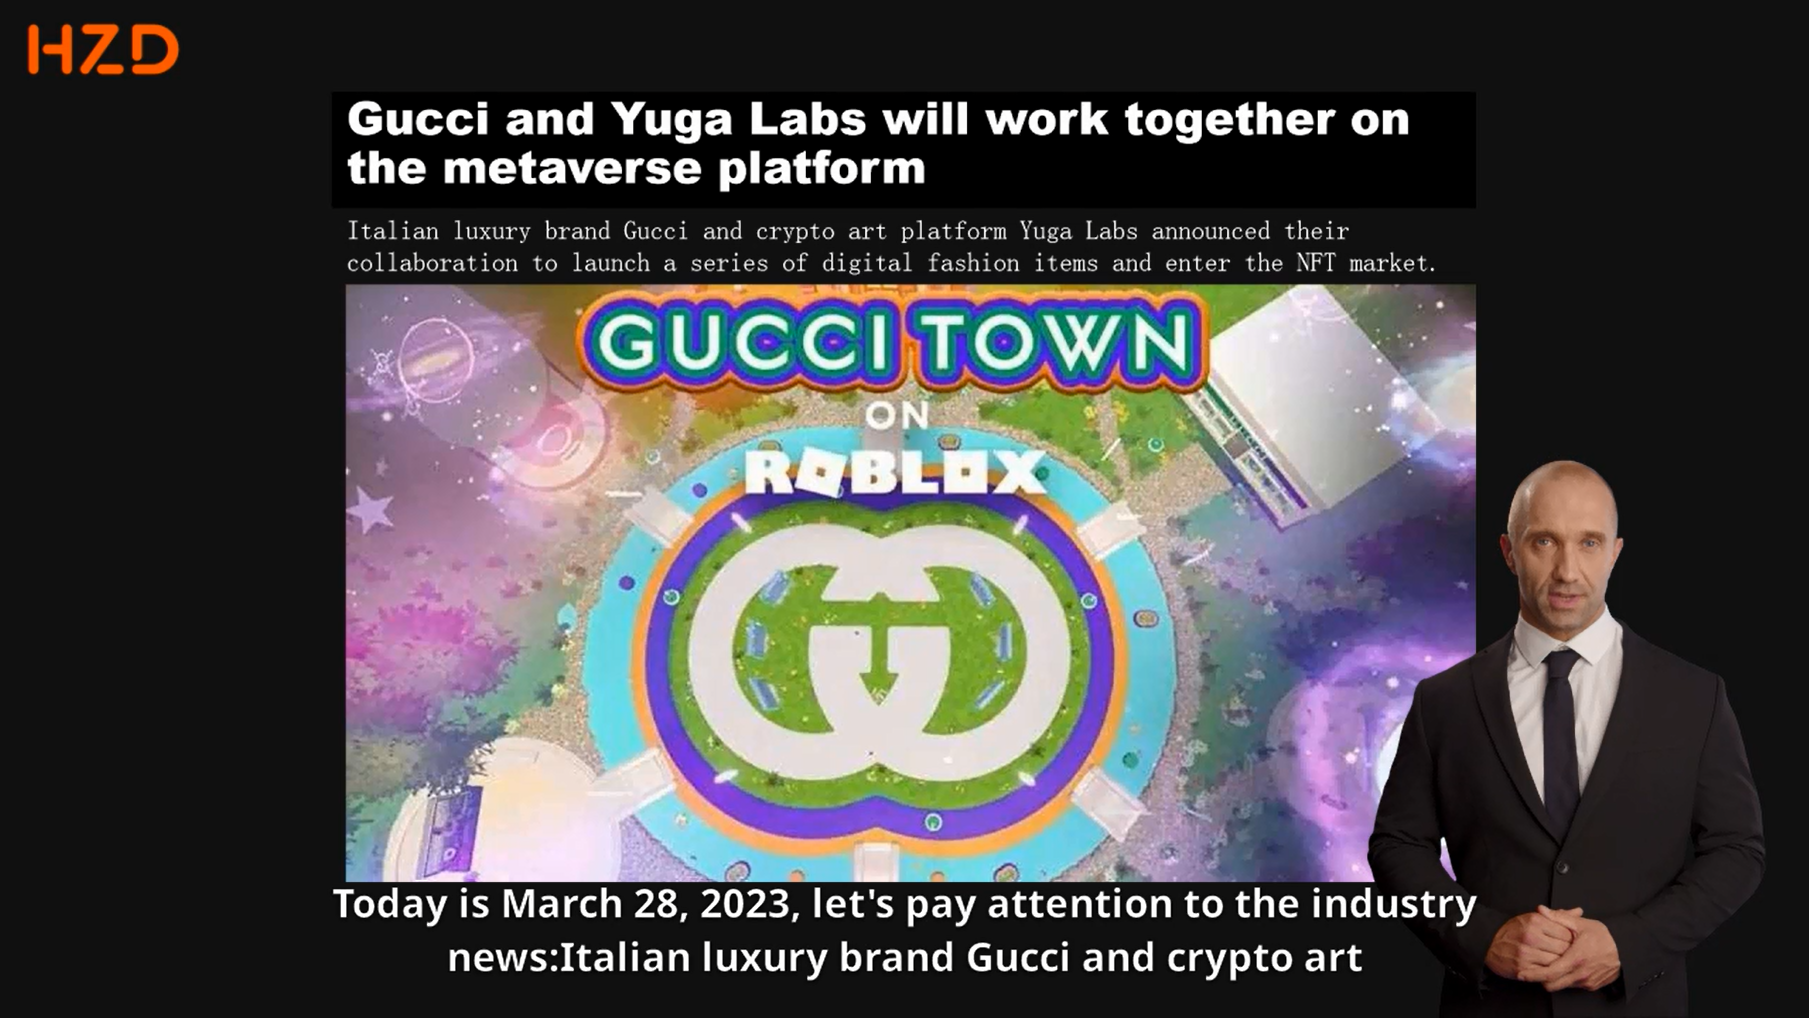 Gucci and Yuga Labs will work together on the metaverse platform